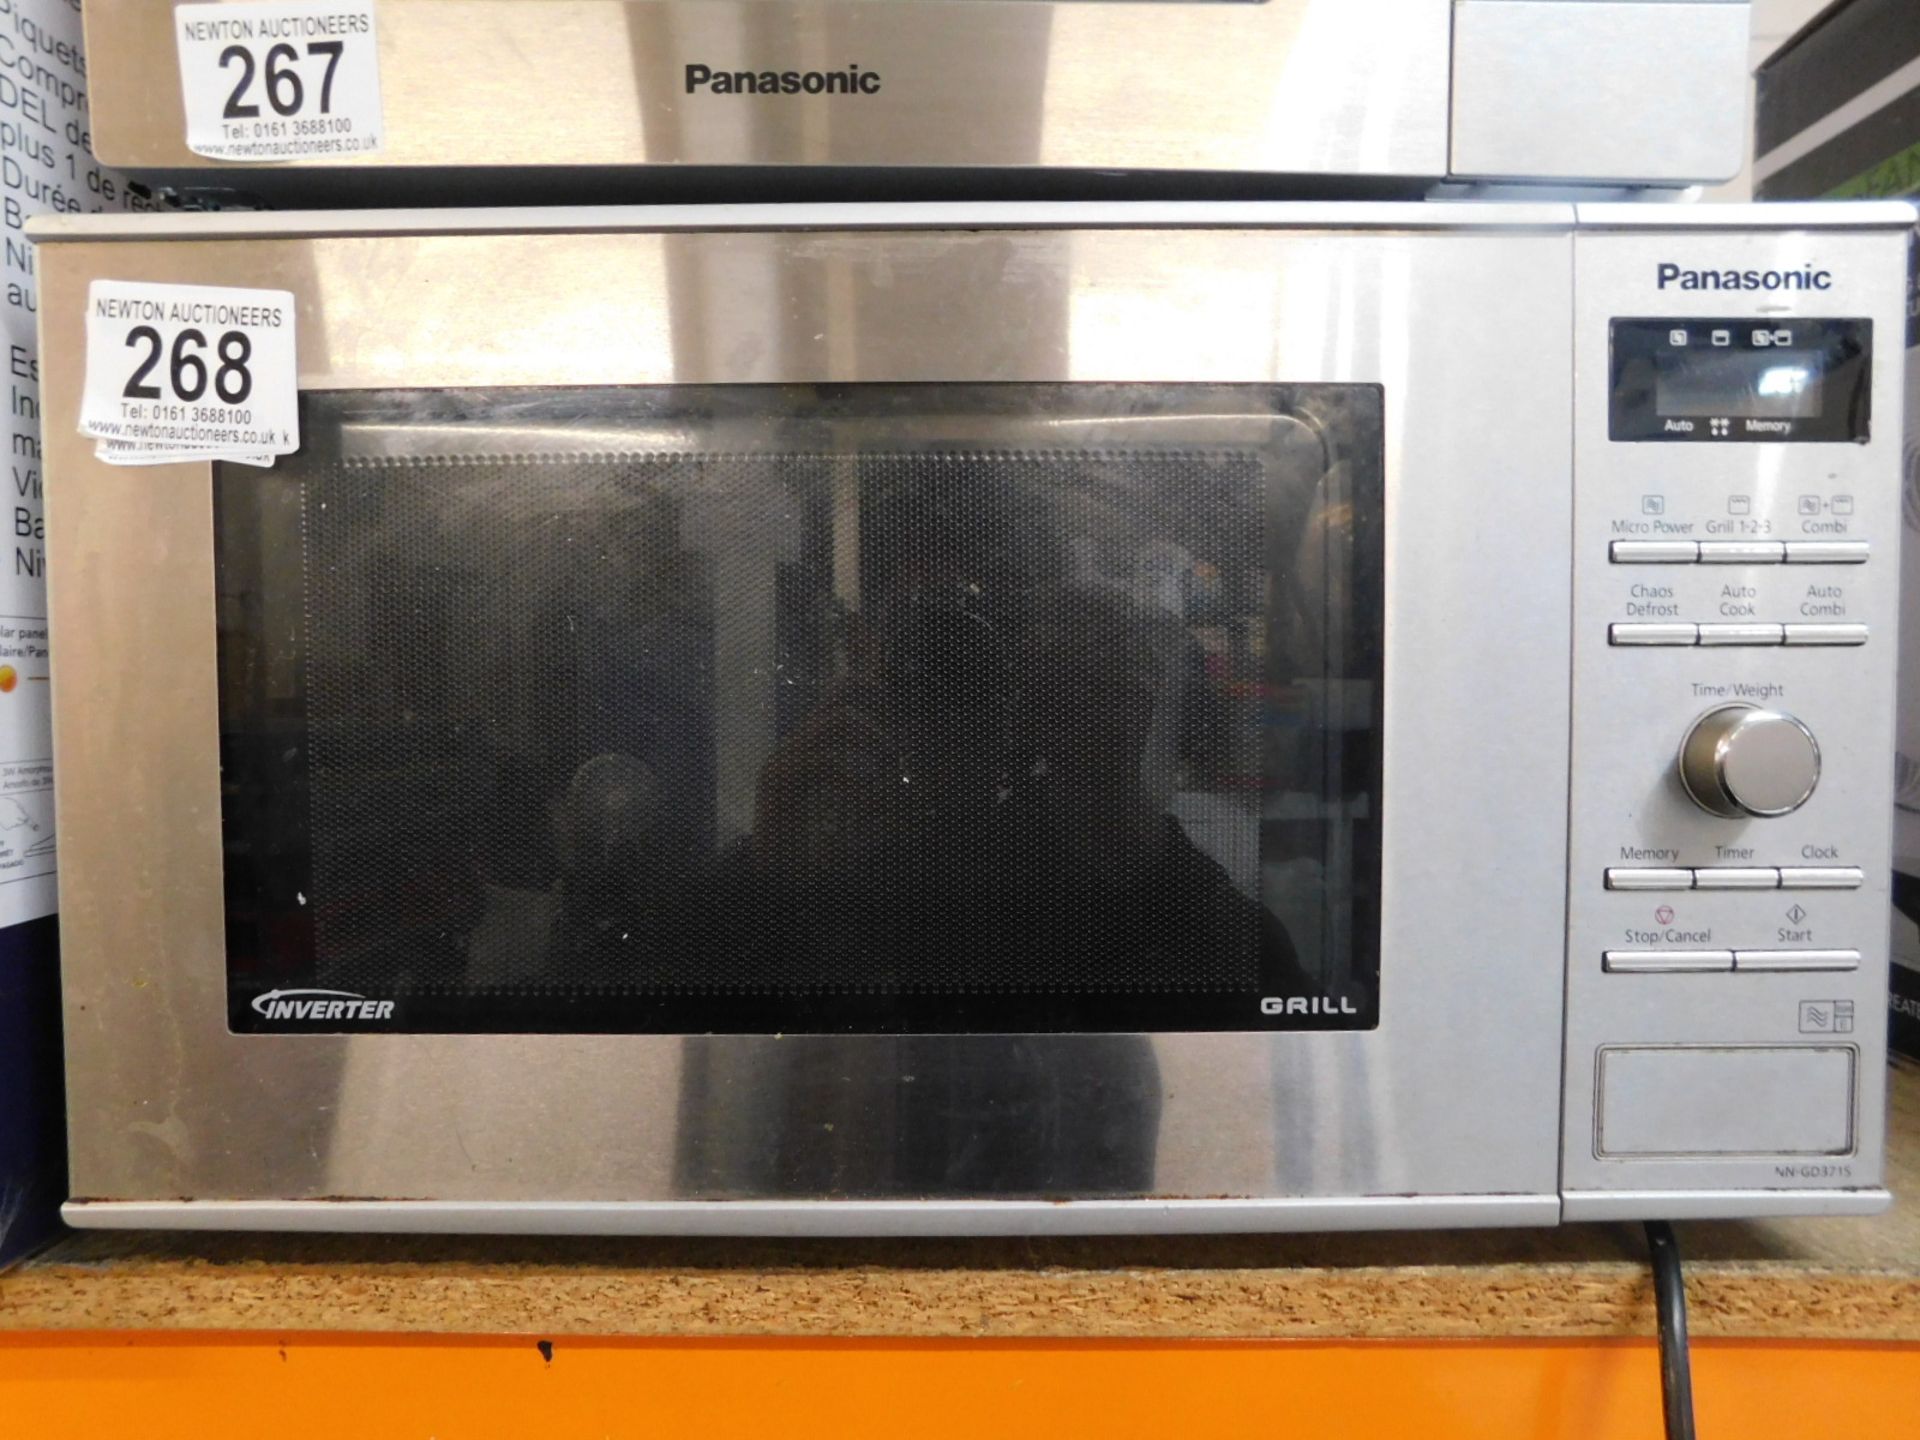 1 PANASONIC NN-GD371S STAINLESS STEEL INVERTER MICROWAVE RRP Â£249.99 (USED CONDITION)